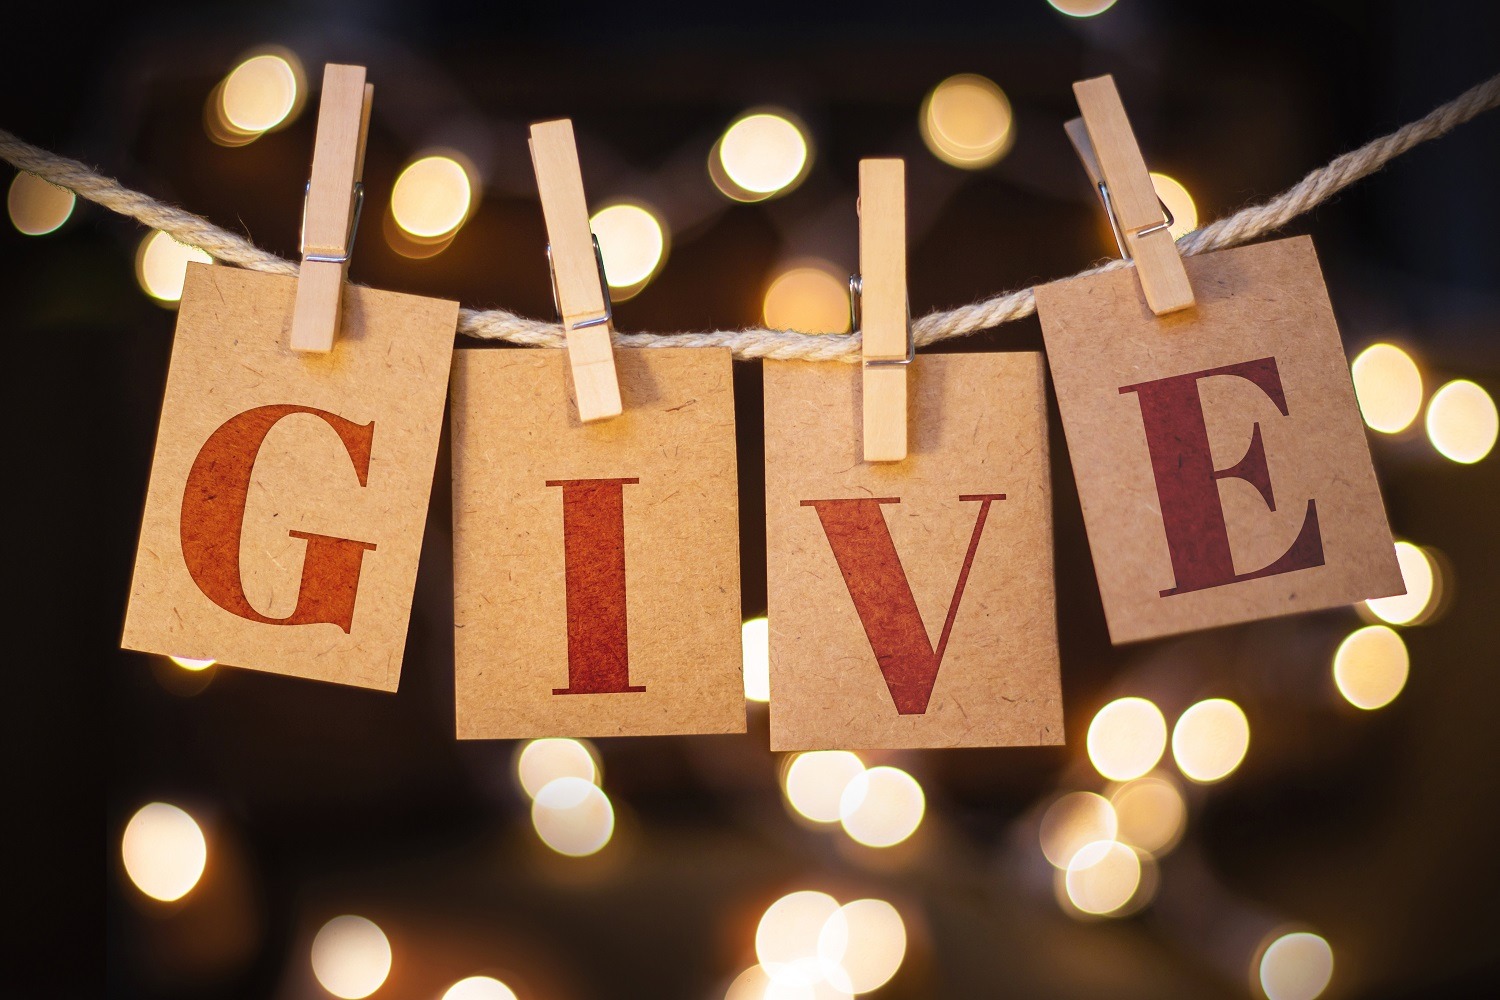 5 local charities to support this holiday season